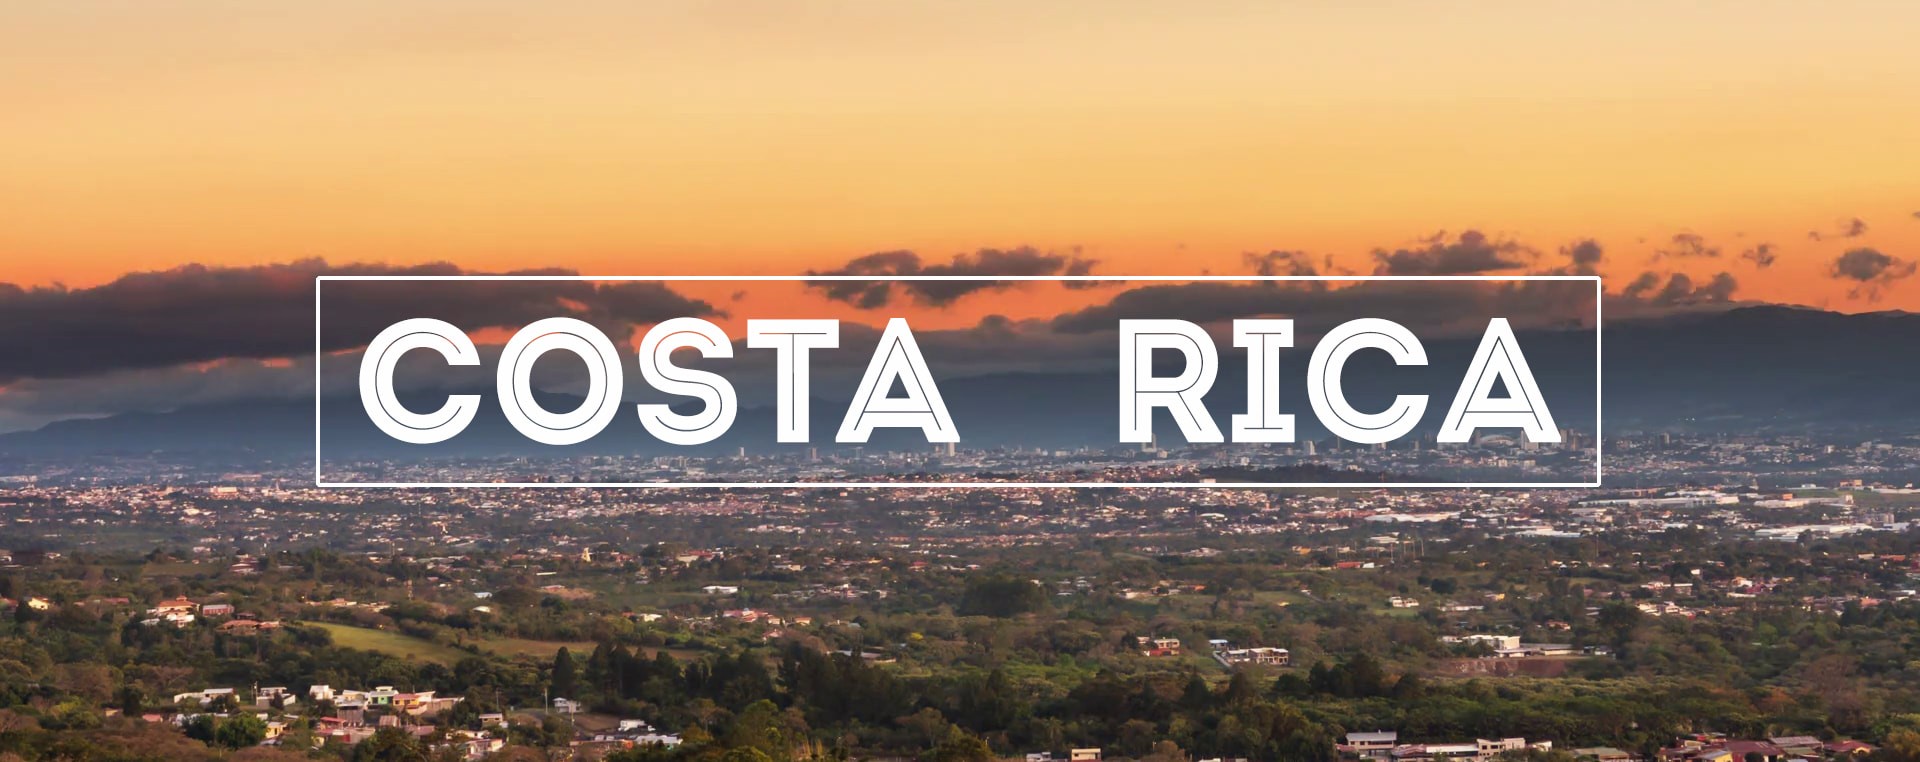 10 good things that happened in Costa Rica during 2019